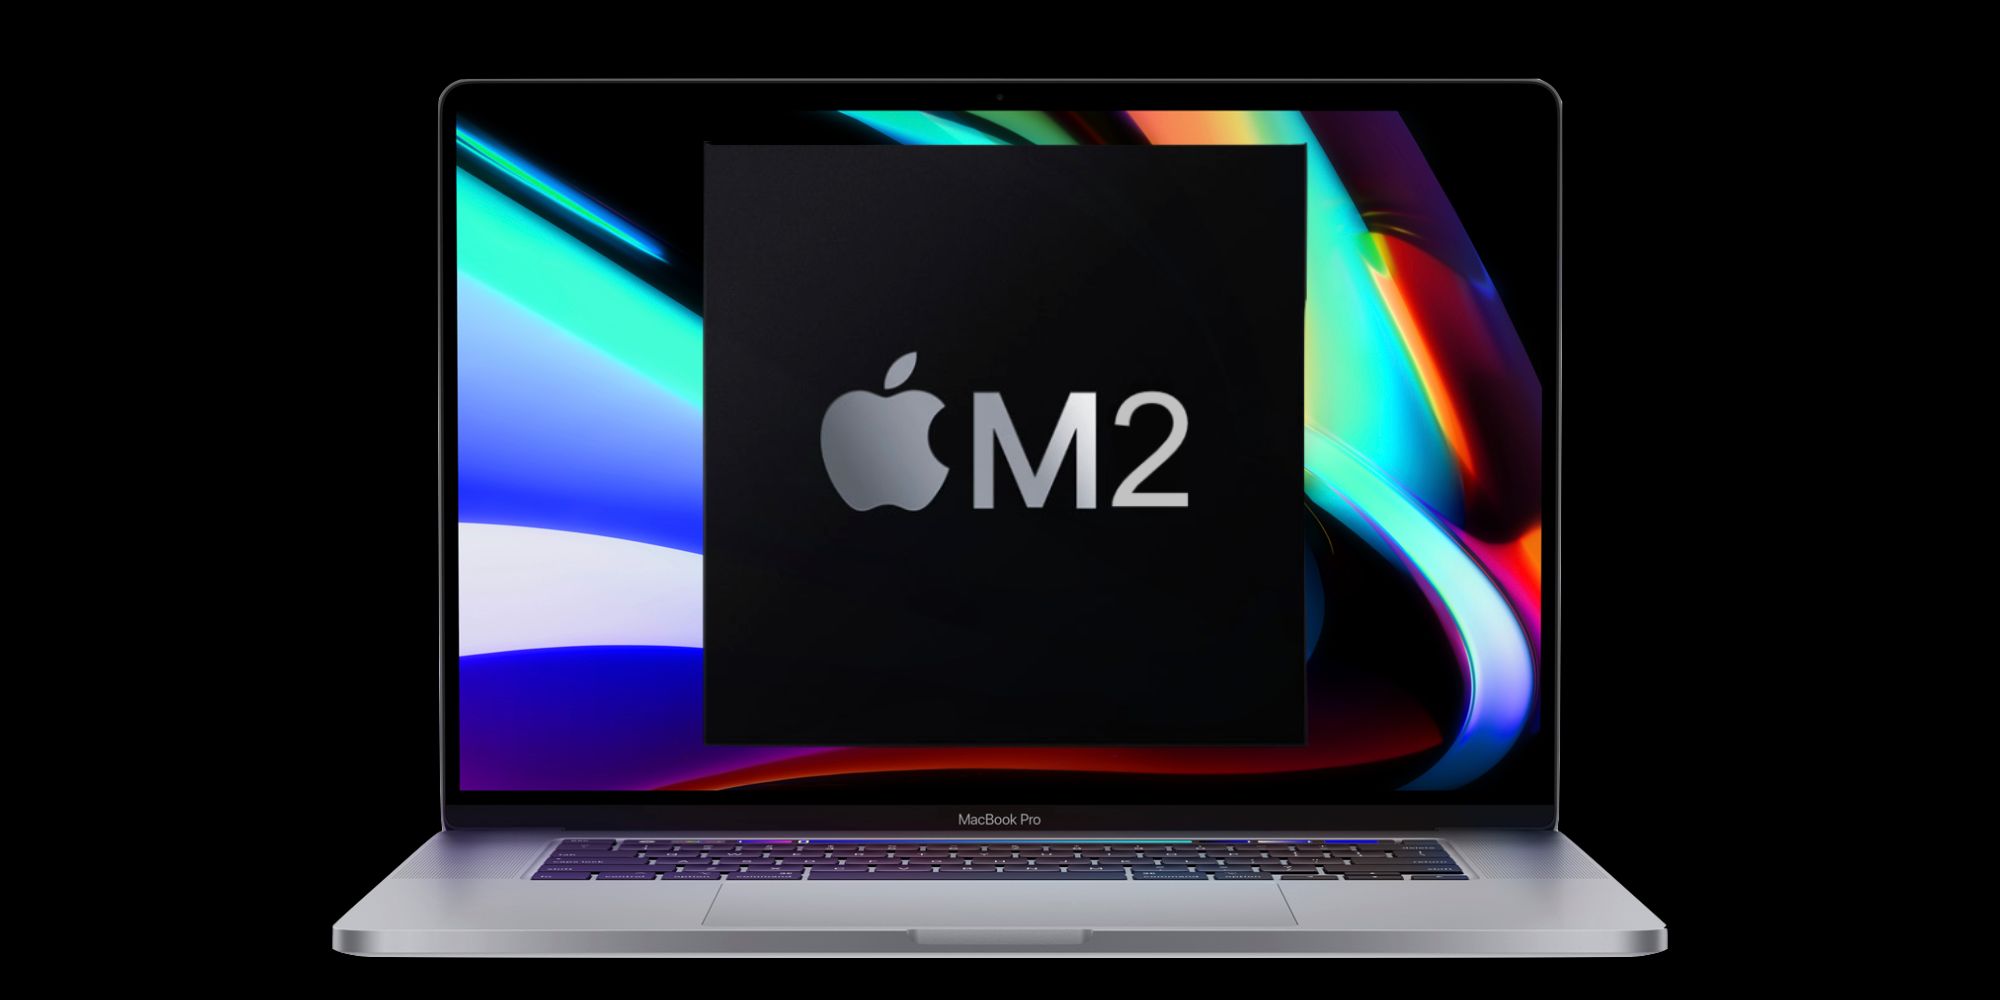 16-inch MacBook Pro with Apple M2 chip on it